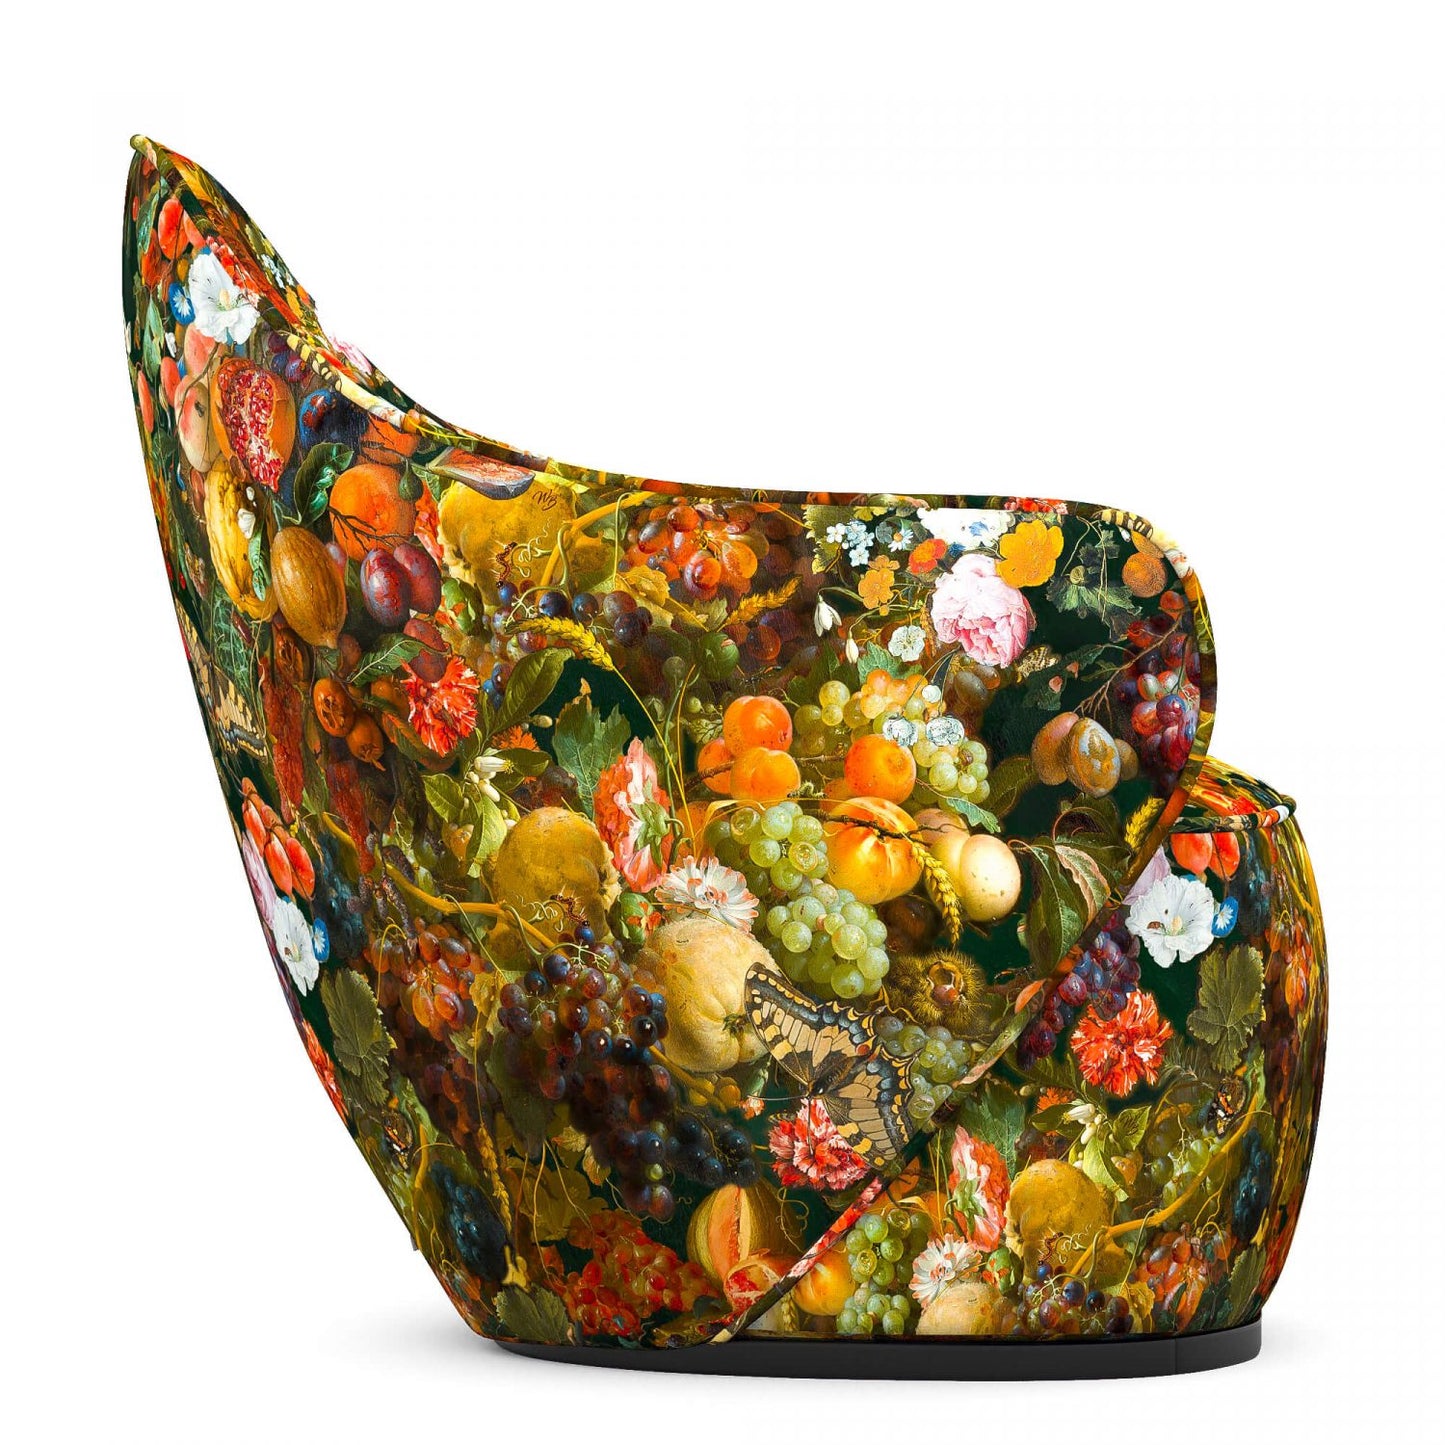 Garland of fruits and flowers hug armchair - Wolff Blitz